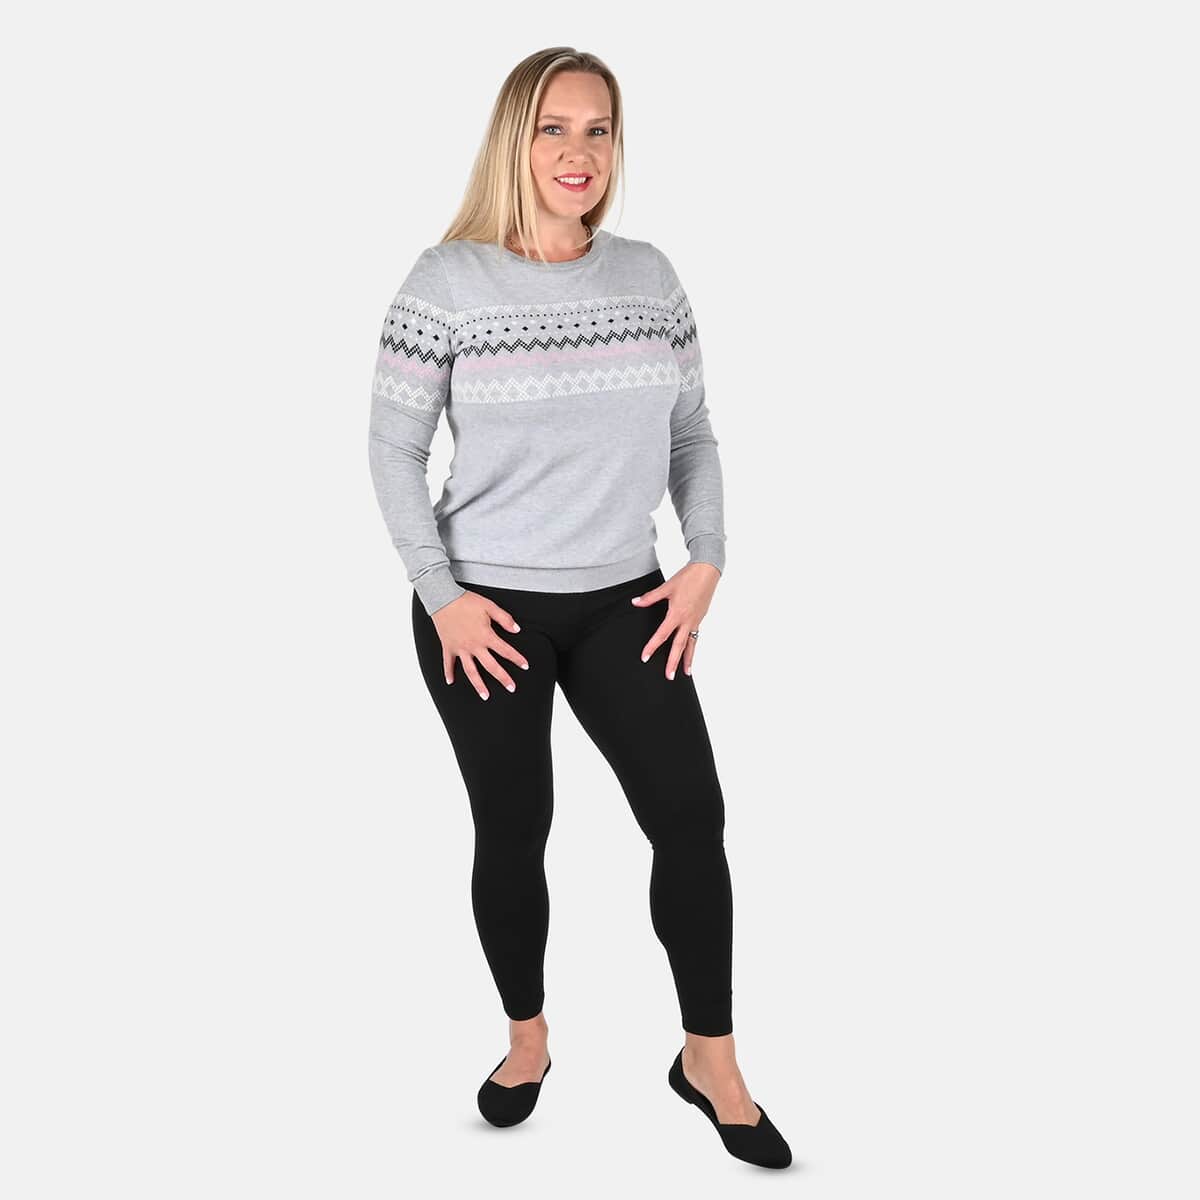 TAMSY Gray Knit Round Neck Sweater with Chevron Pattern - L image number 0